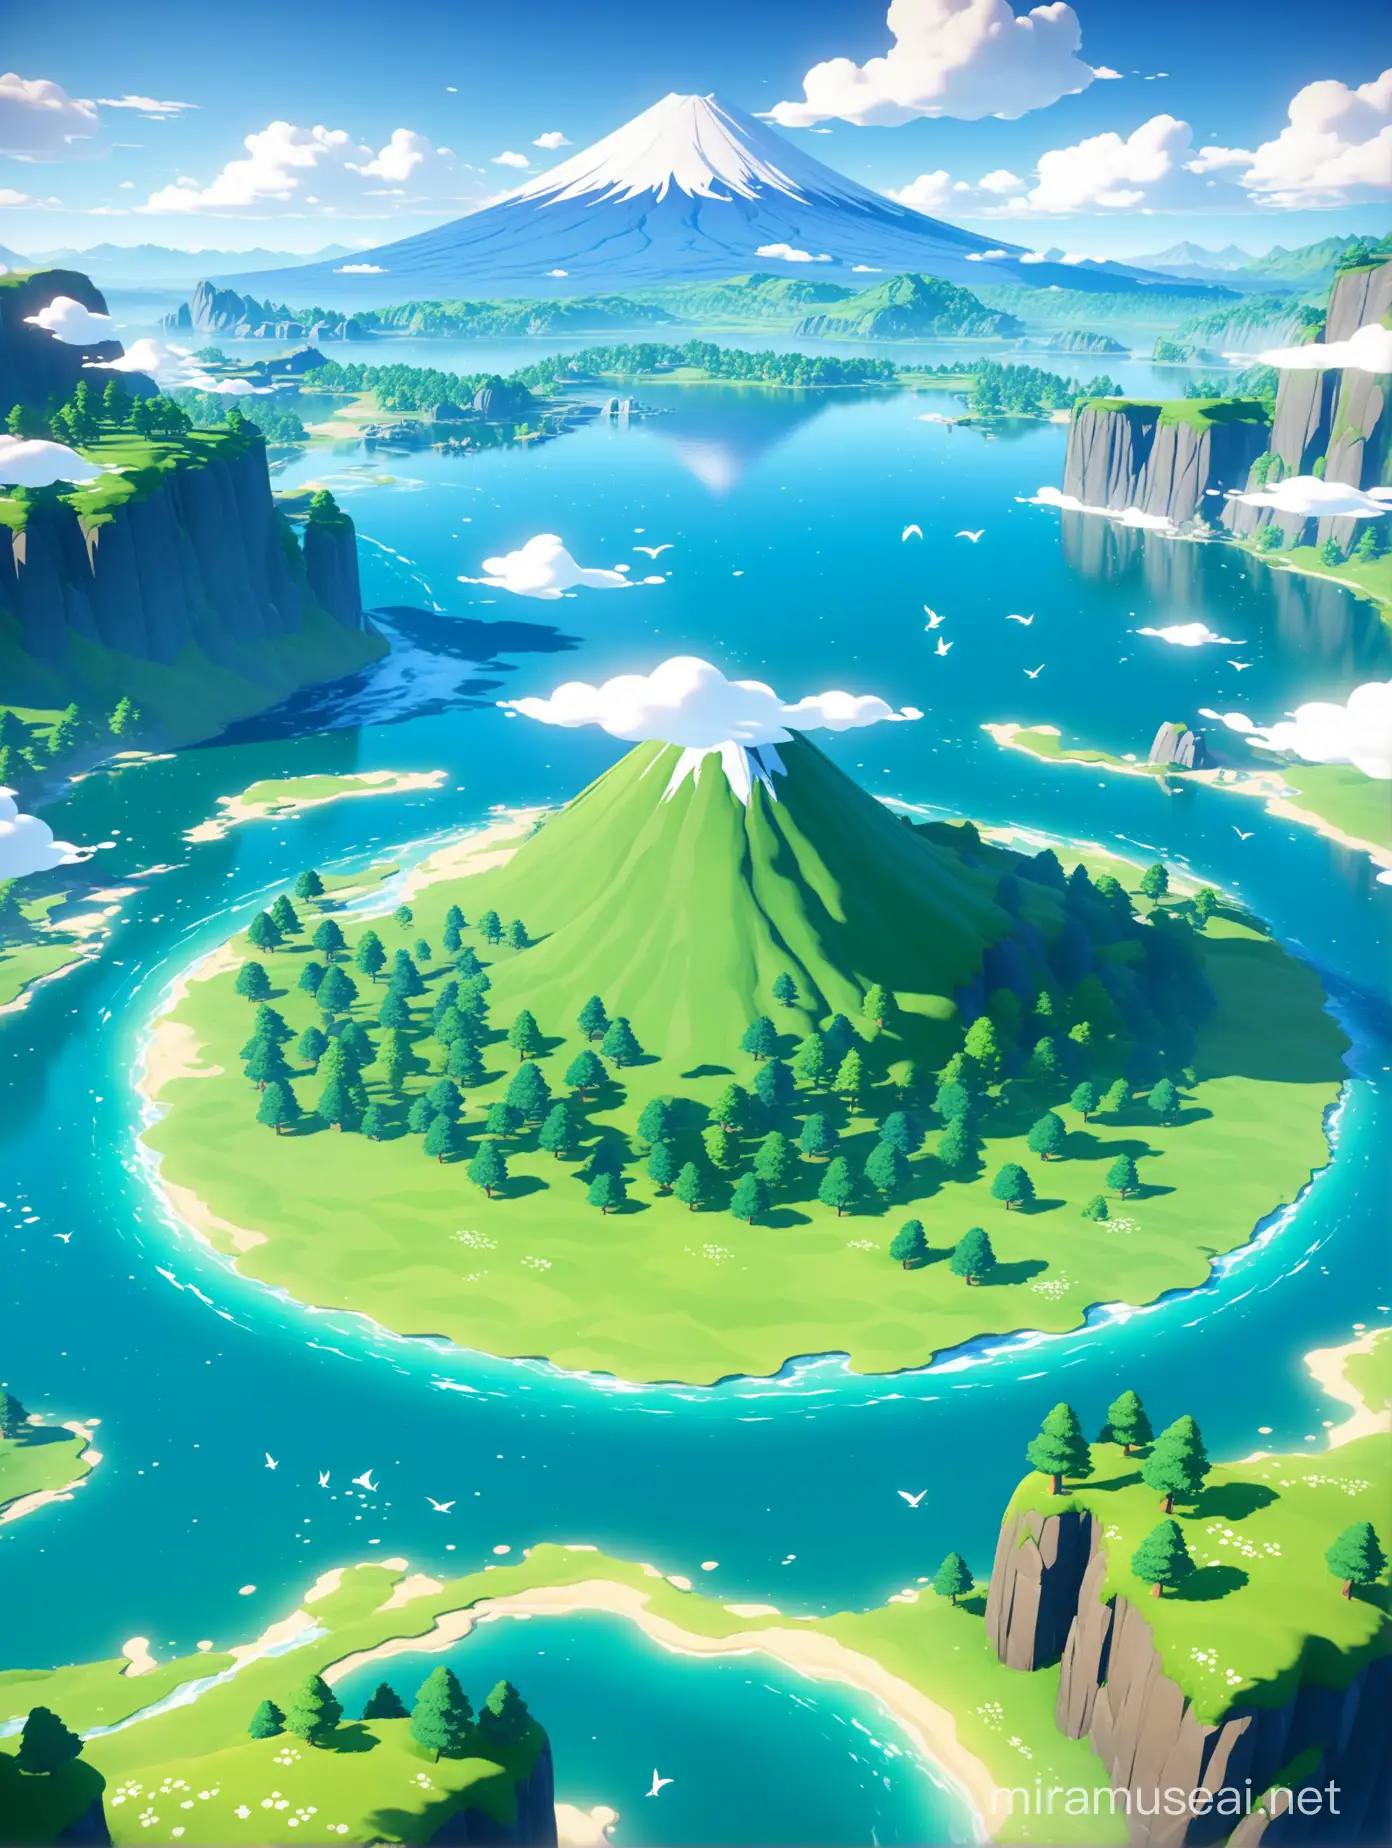 create an image with an art style like the animation in the game Genshin Impact, which uses unreal engine technology, namely a landscape image of a vast grassland, there are cliffs full of green grass, and as far as the eye can see there is a blue lake, and there is Mount Fuji which is beautiful with ice at the top, there are seagulls flying in the sky, and the sky is clear, cloudy. 3D animation, super detailed, 4k, extremely high definition